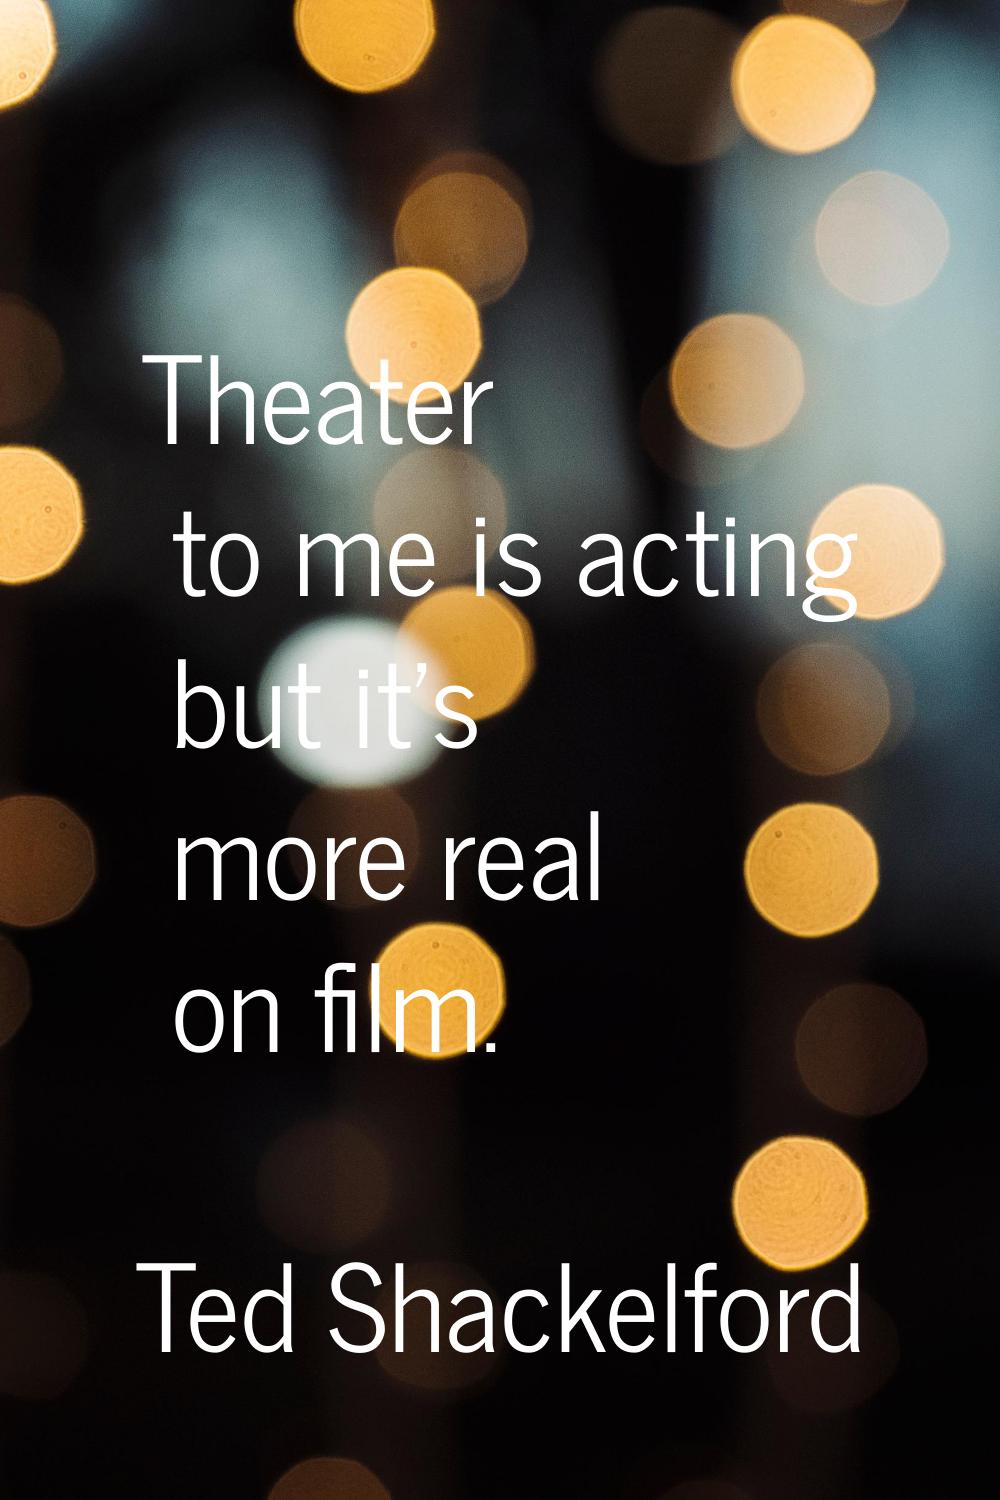 Theater to me is acting but it's more real on film.